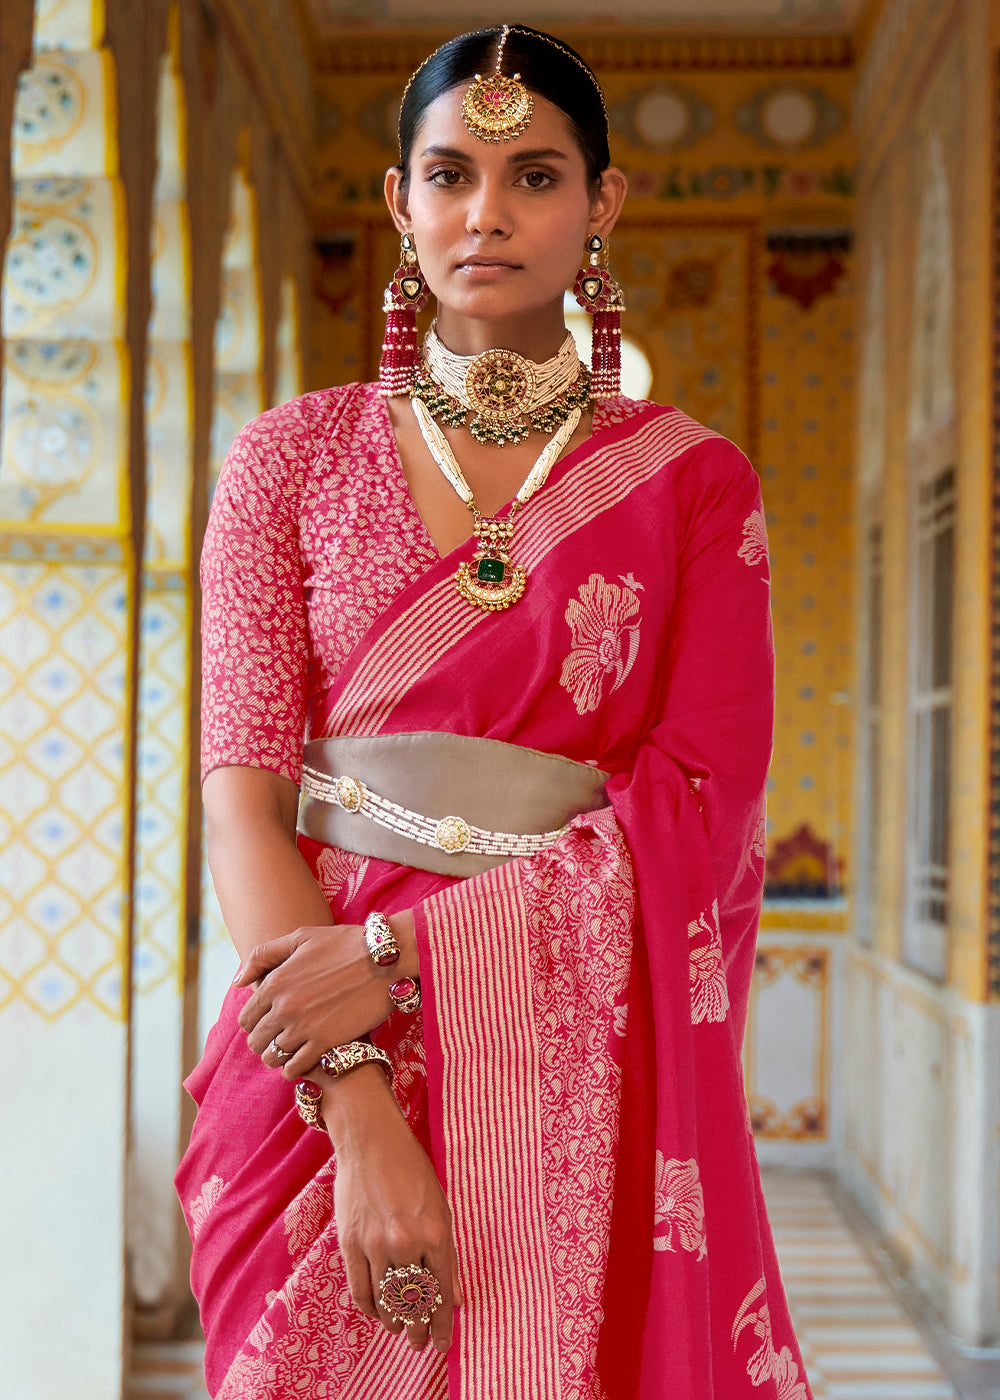 Exquisite Elegance: Discover the Charm of Our Rani Pink Banarasi